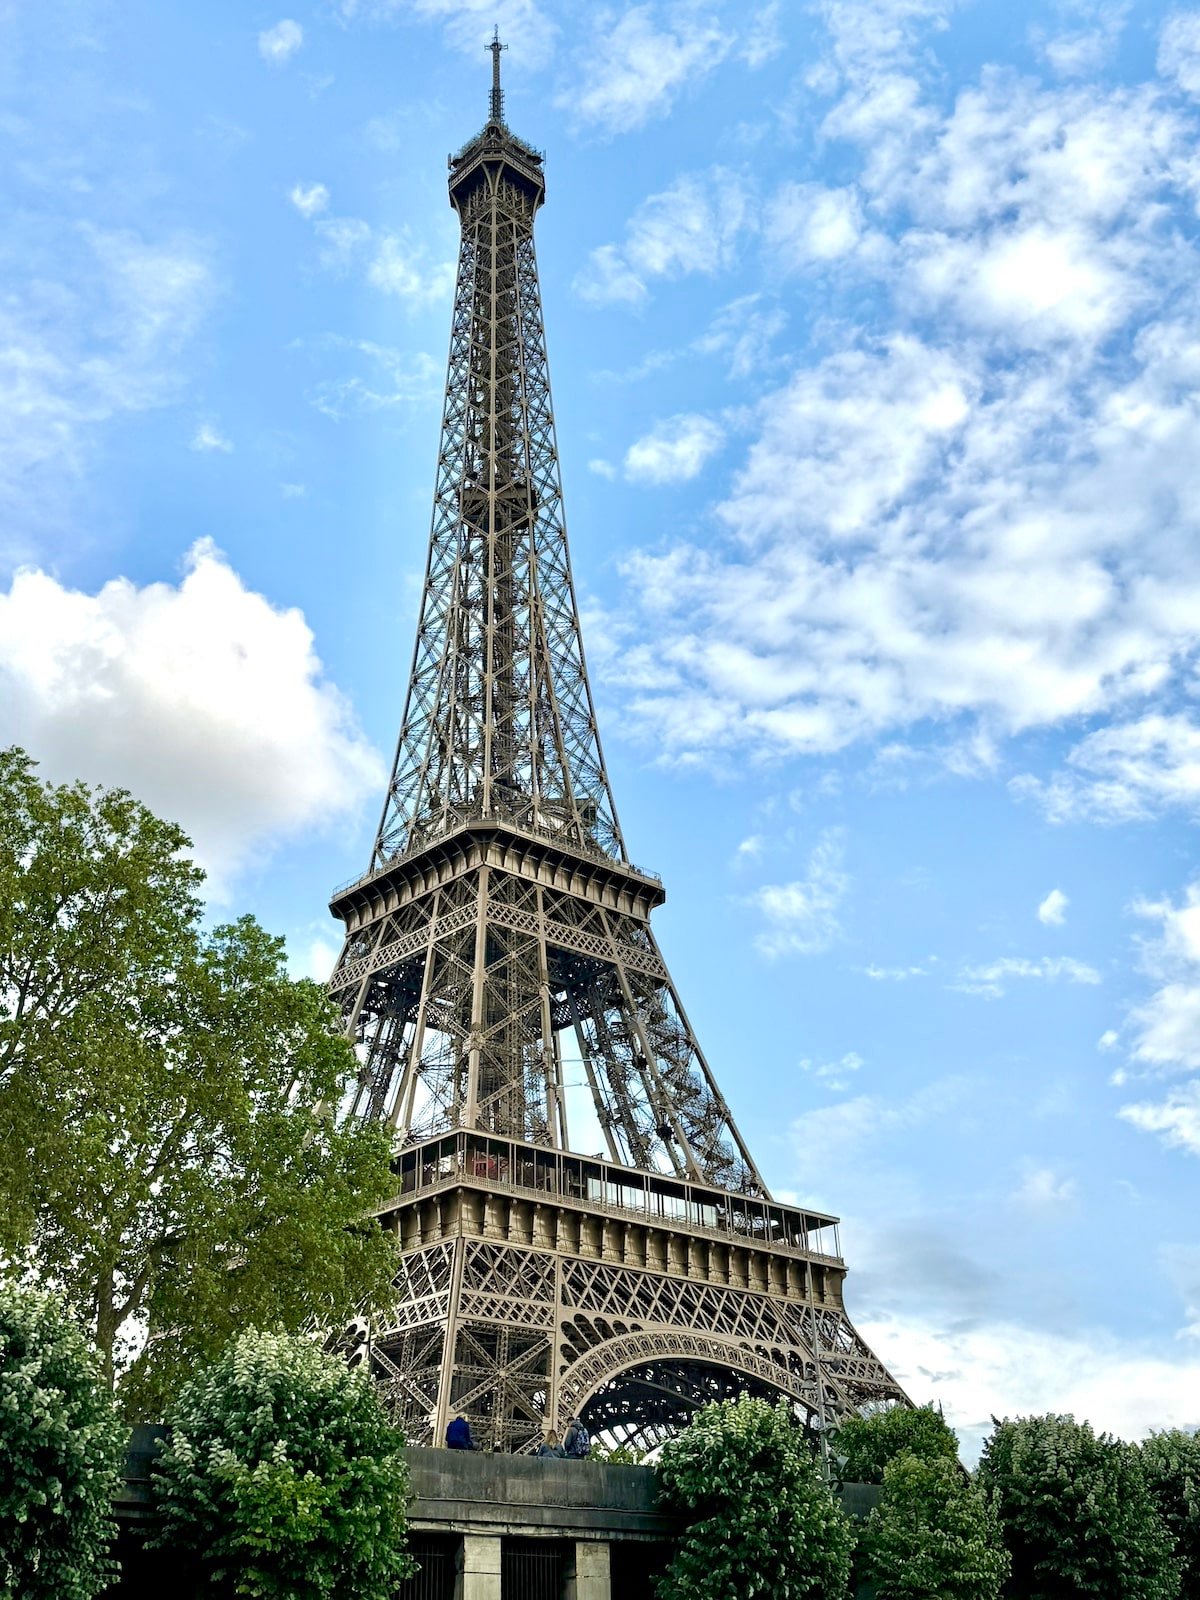 The Eiffel Tower stands tall against a blue sky with scattered clouds, surrounded by green trees at its base, creating an unforgettable sight for anyone spending one day in Paris.